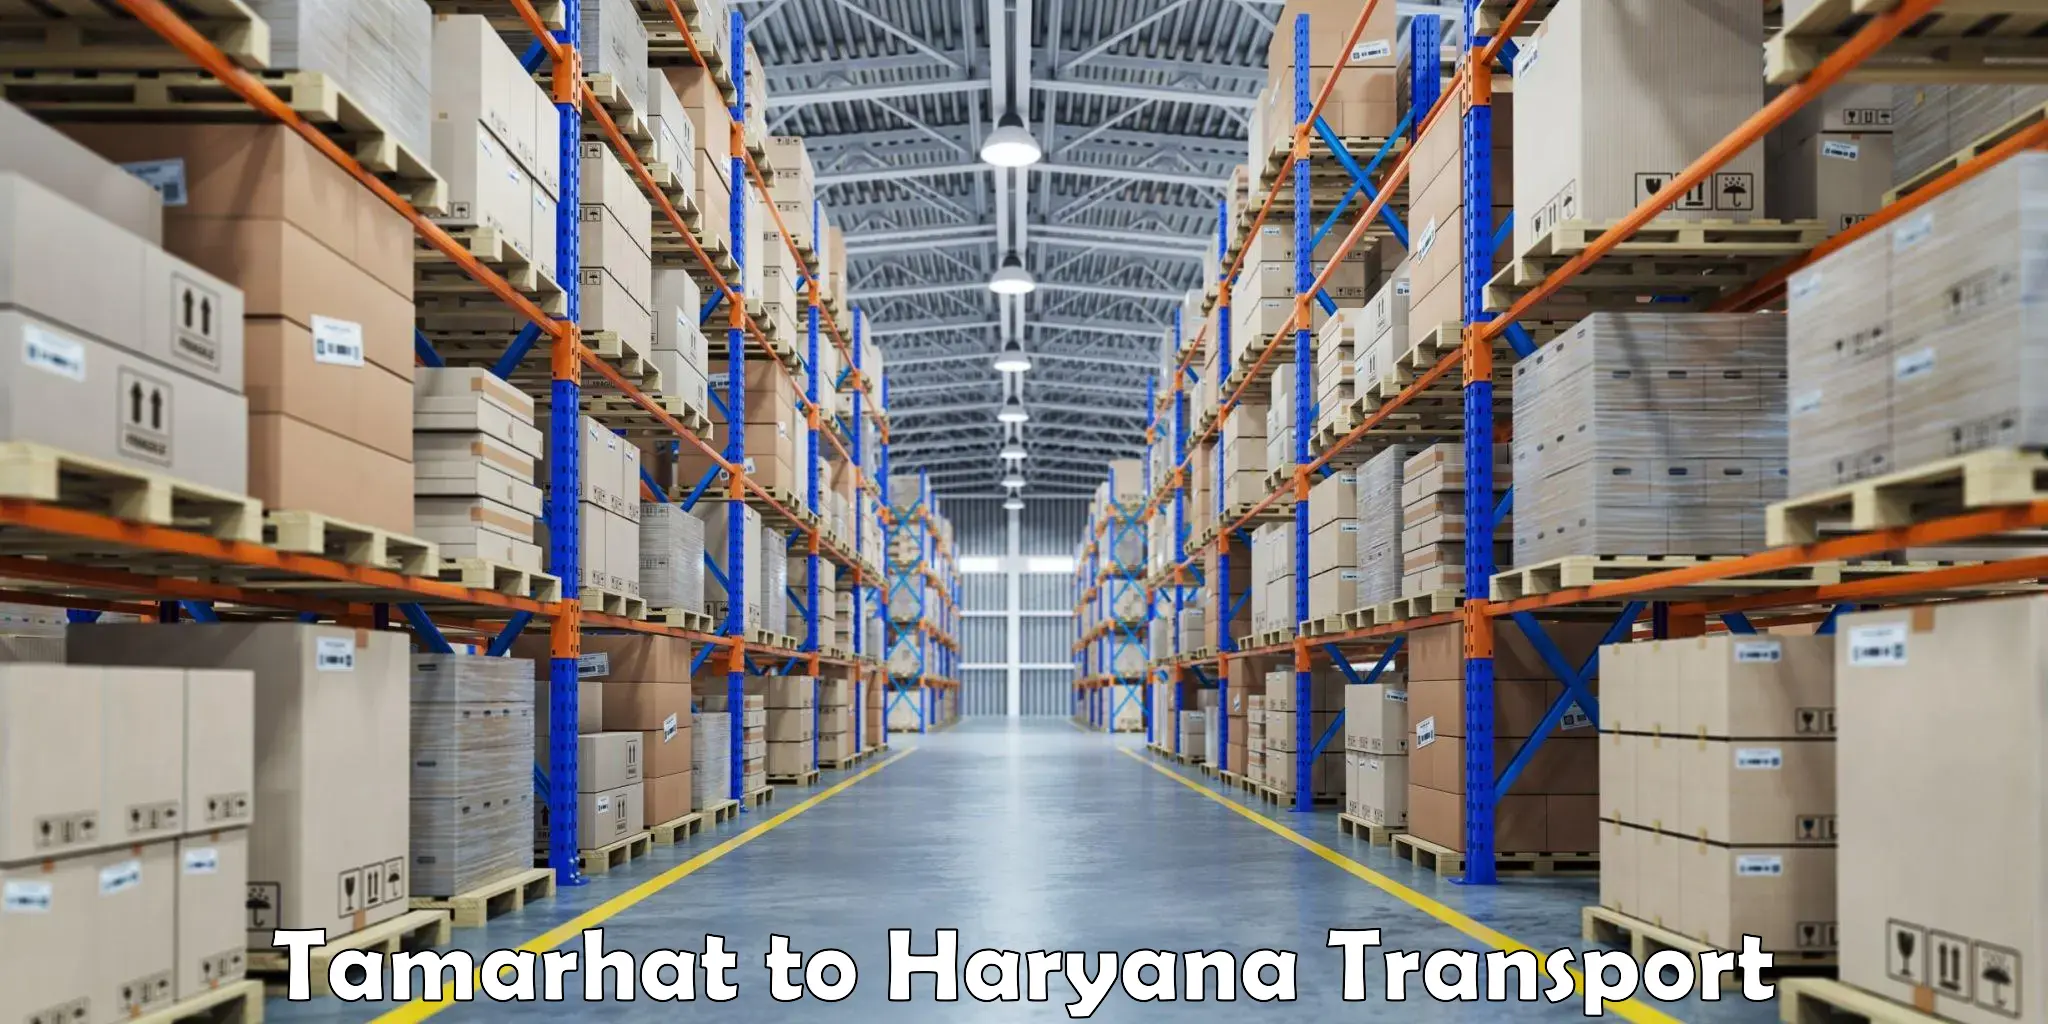 Nearest transport service Tamarhat to Chaudhary Charan Singh Haryana Agricultural University Hisar